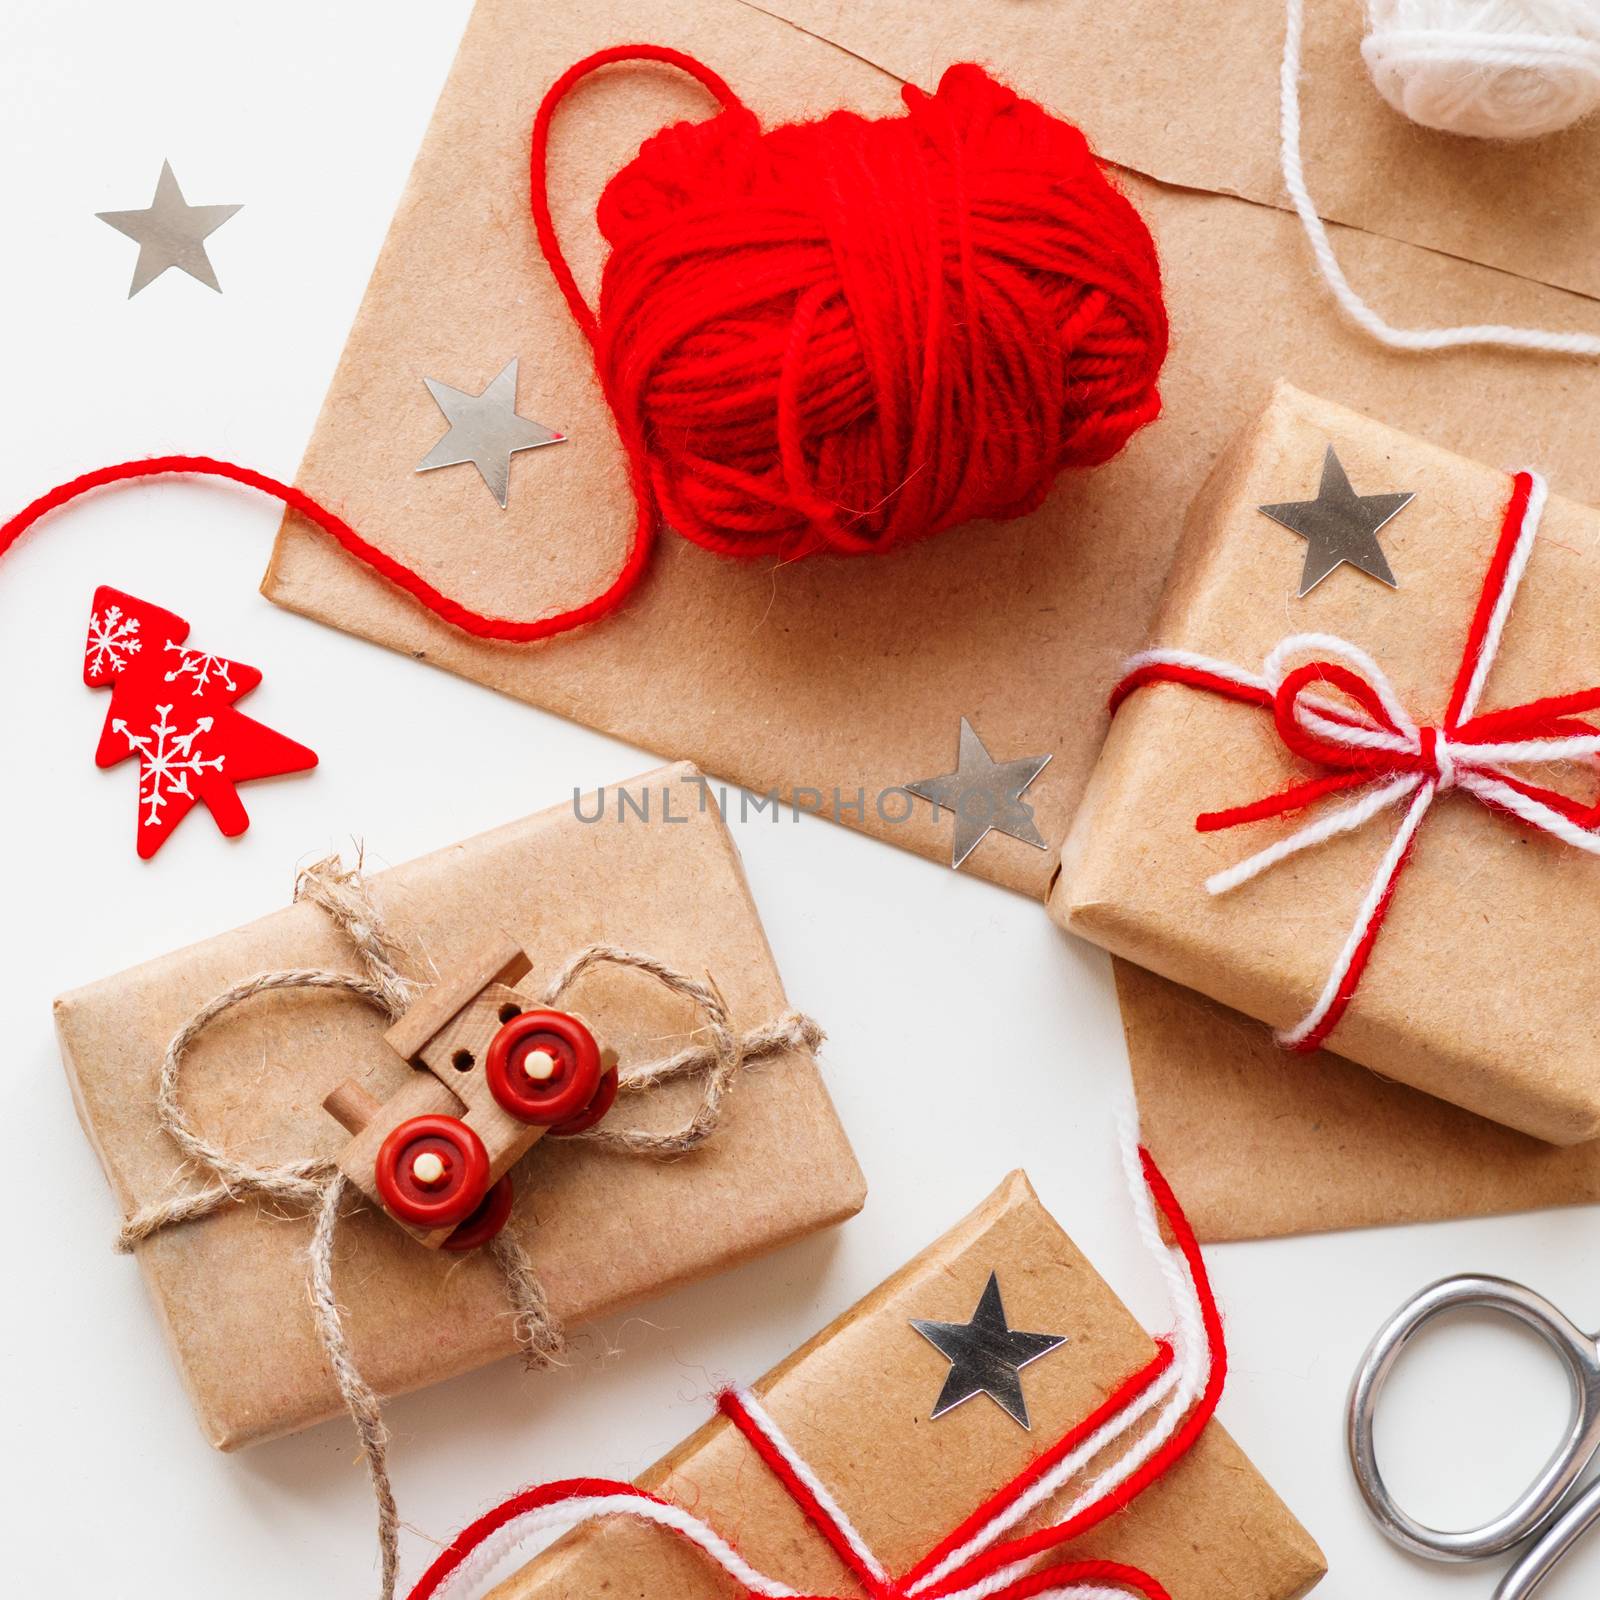 Christmas and New Year DIY presents in craft paper. Holiday gifts tied with white and red threads with toy train and red heart symbol as decoration.